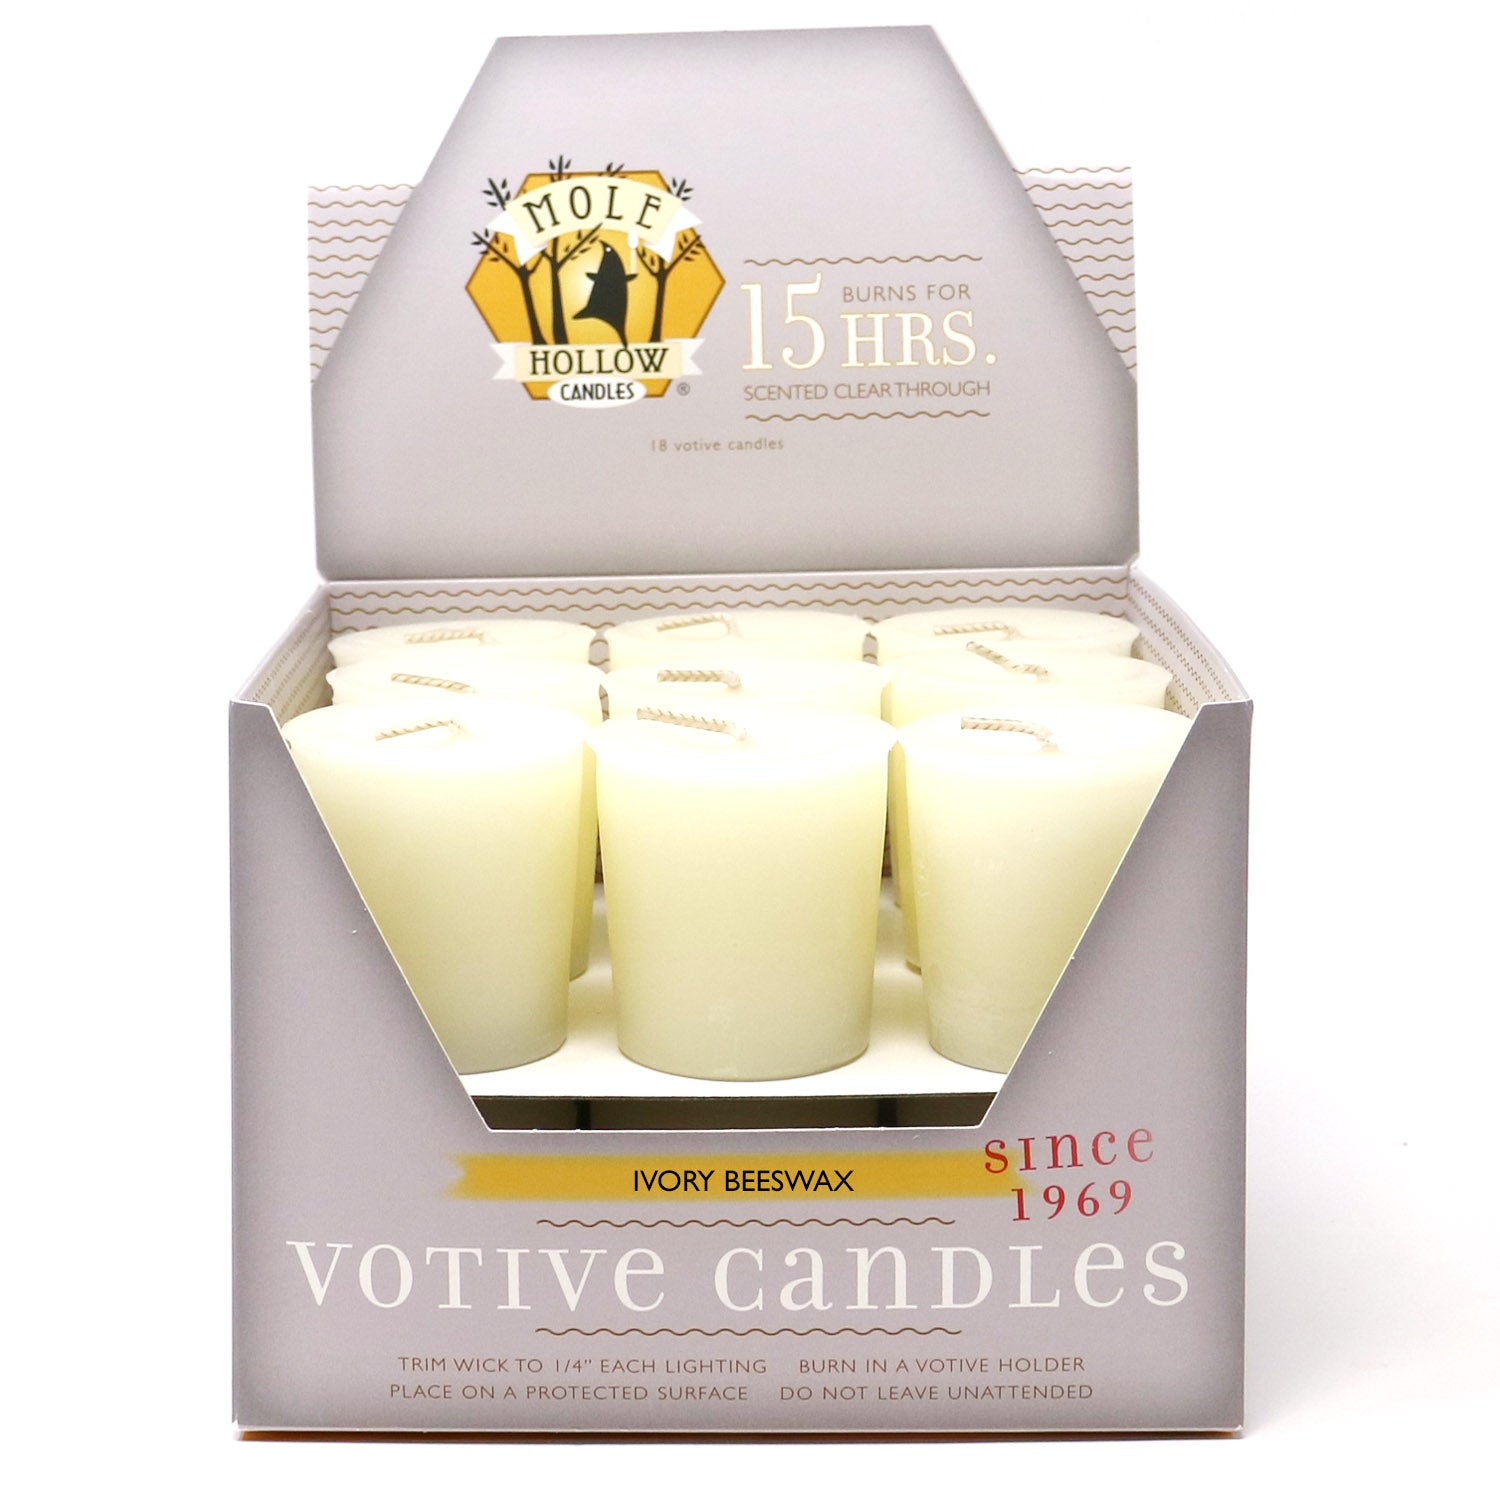 Ivory Beeswax Votive Candles - Natural Beeswax Candles - Mole Hollow Candles